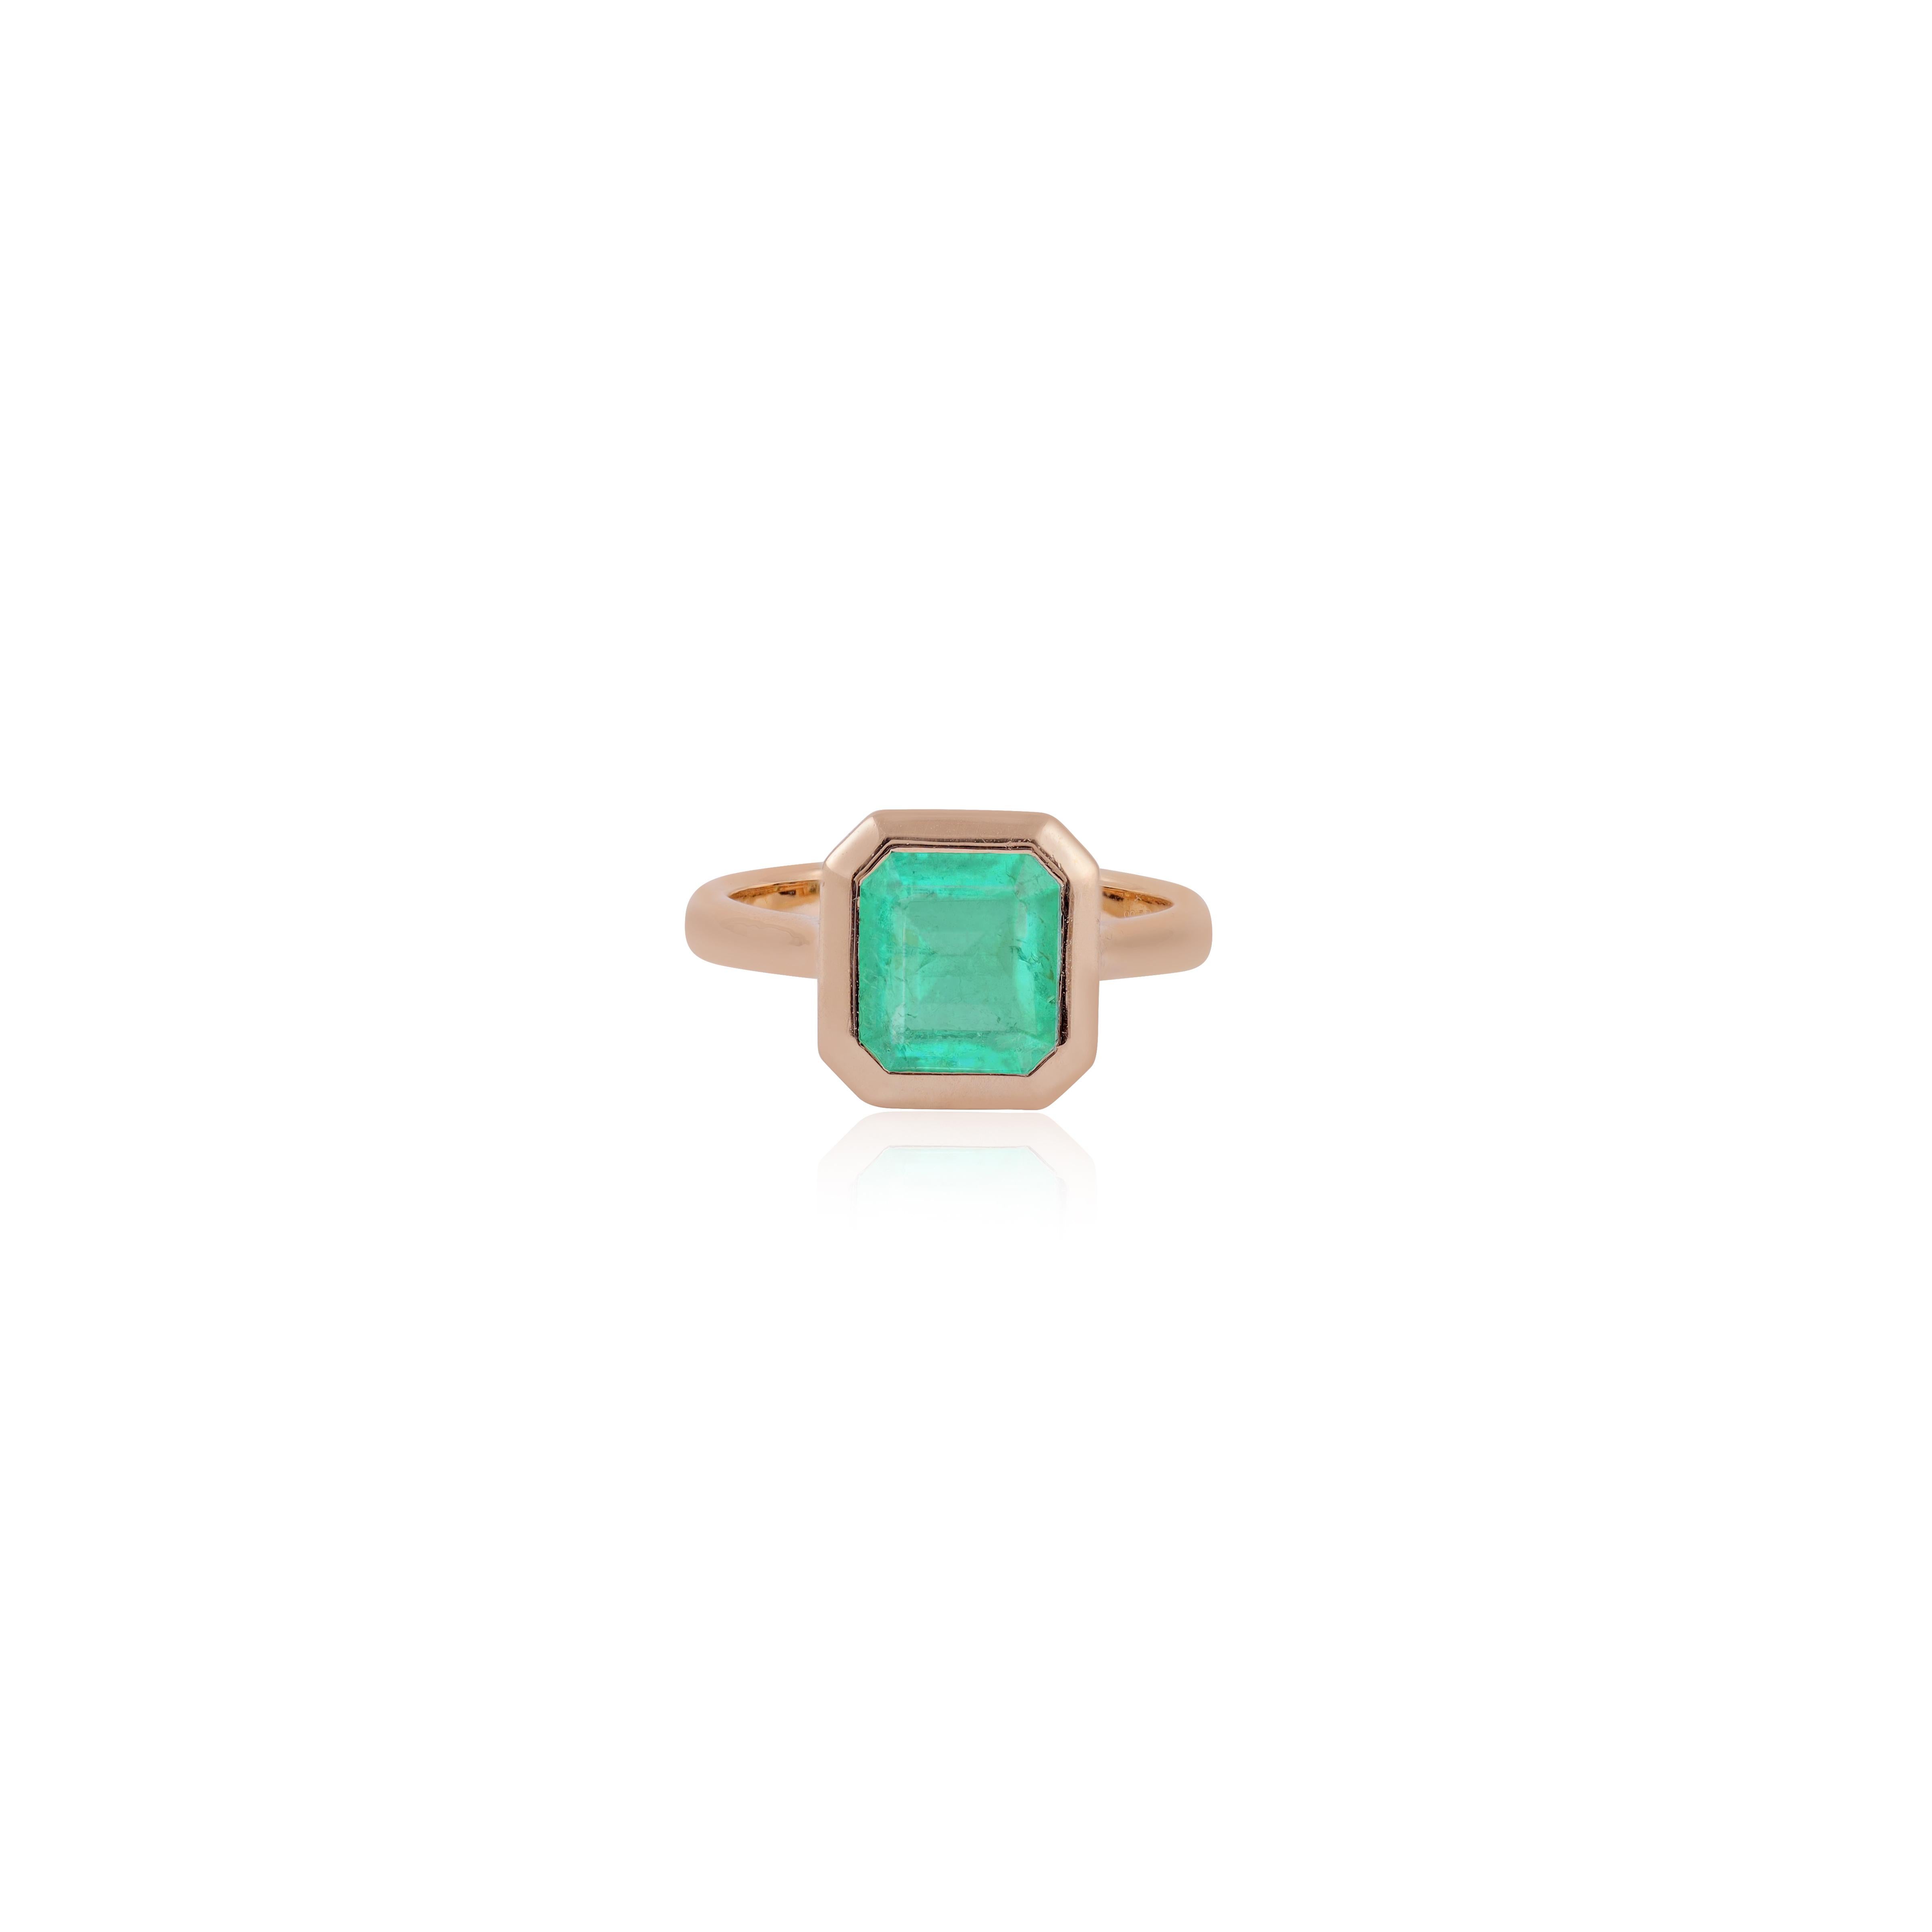 Elegant Colombian Emerald Close Setting Ring are fun to wear. A classic Single Stone  of Ring with a designer touch with its setting in 18K Yellow gold, giving it a true Fun look.

2.68 Carat Colombian Emerald Close Setting  Ring  in 18 Karat Rose